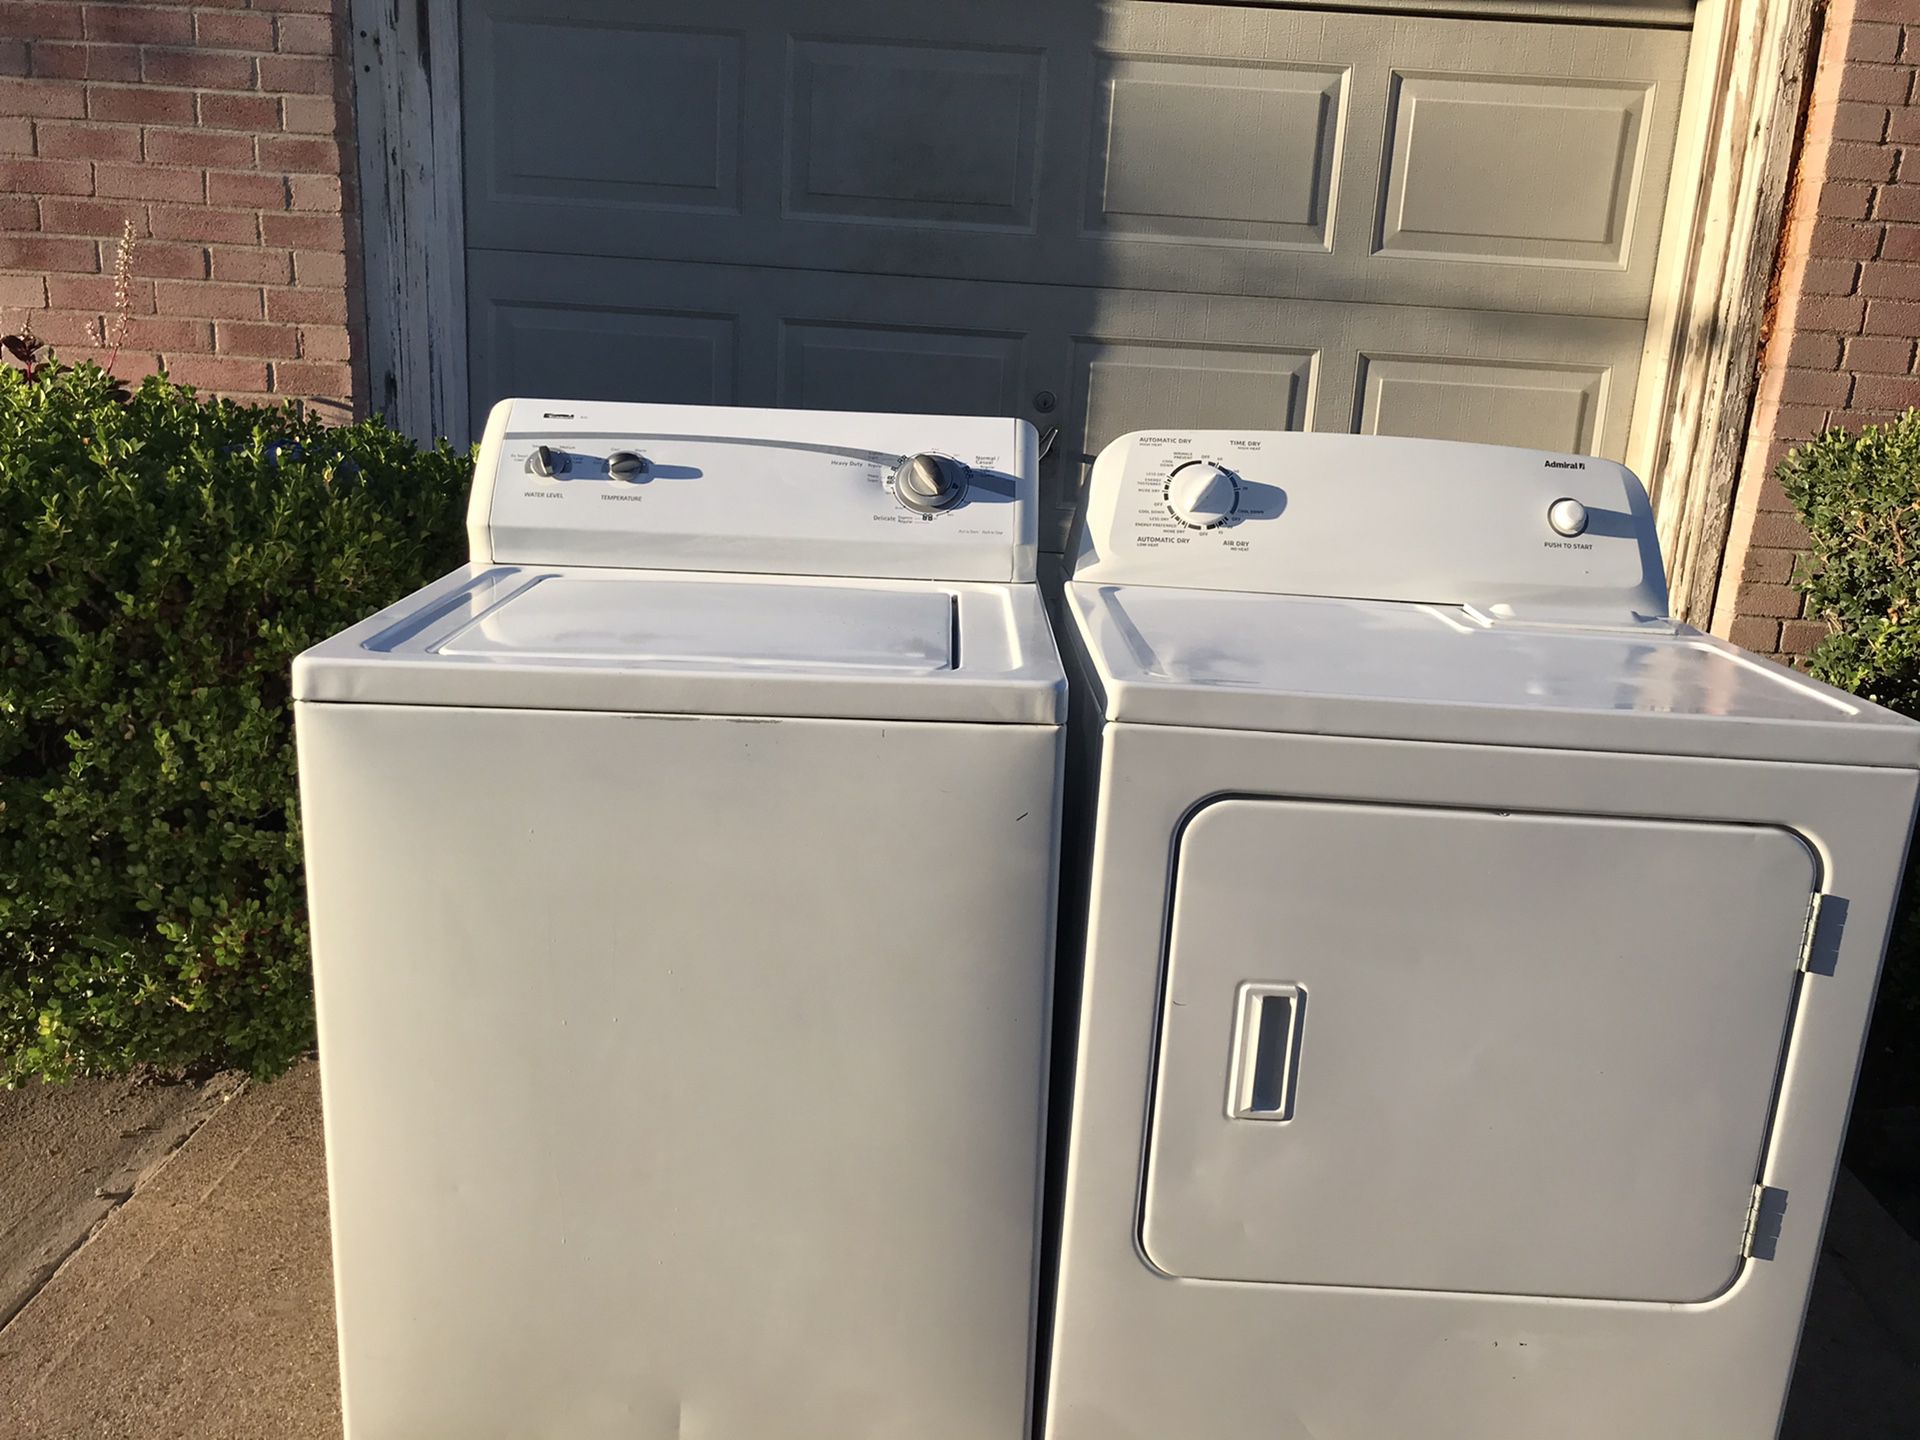 KENMORE WASHER AND DRYER ELECTRIC ADMIRAL ELECTRIC BOTH WORKING GREAT NO ISSUES AT ALL 30 DAYS WARRANTY